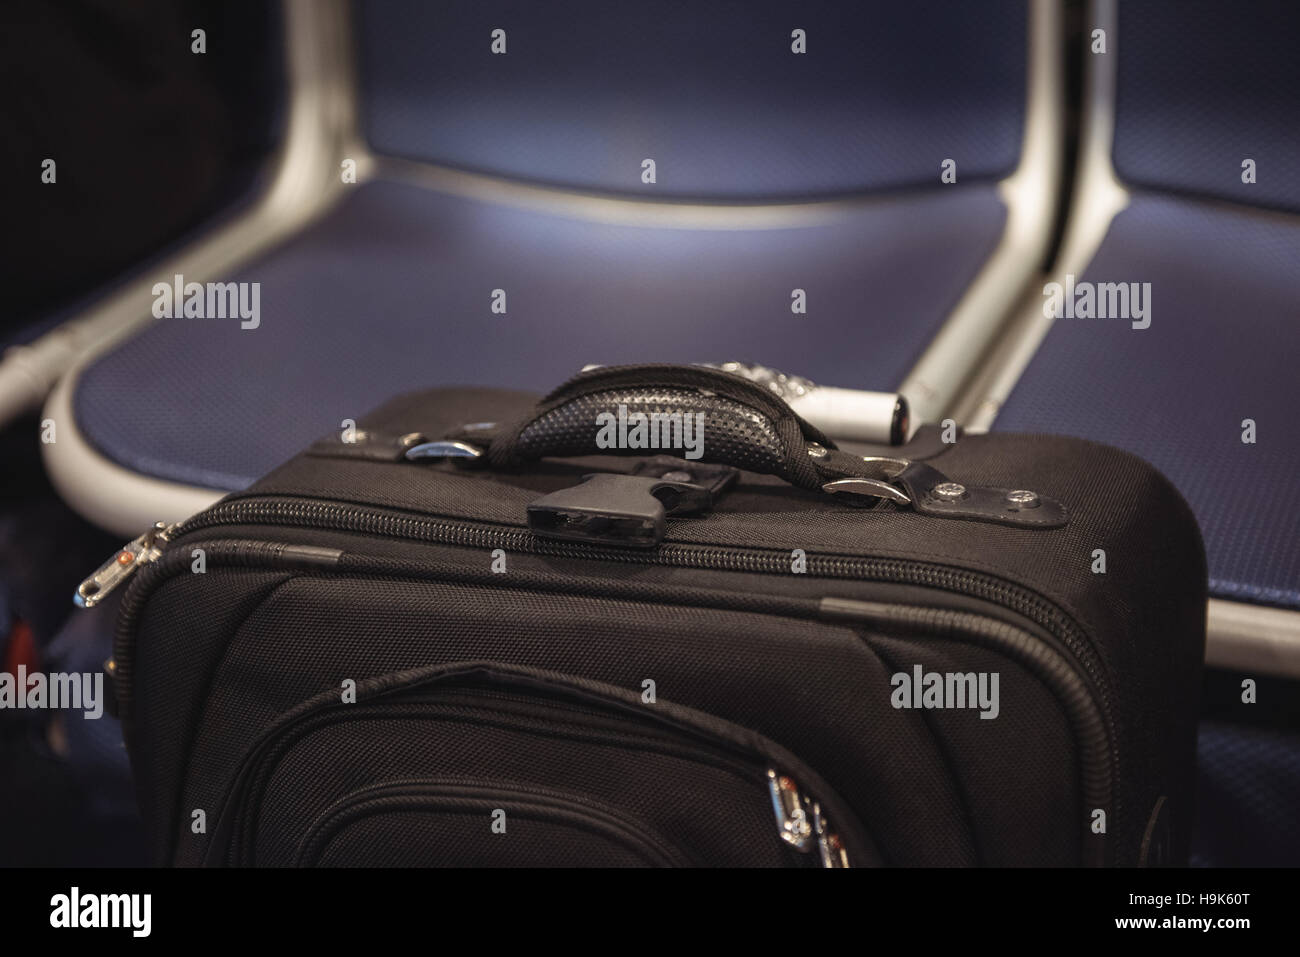 Black color trolley travel bag against seats Stock Photo